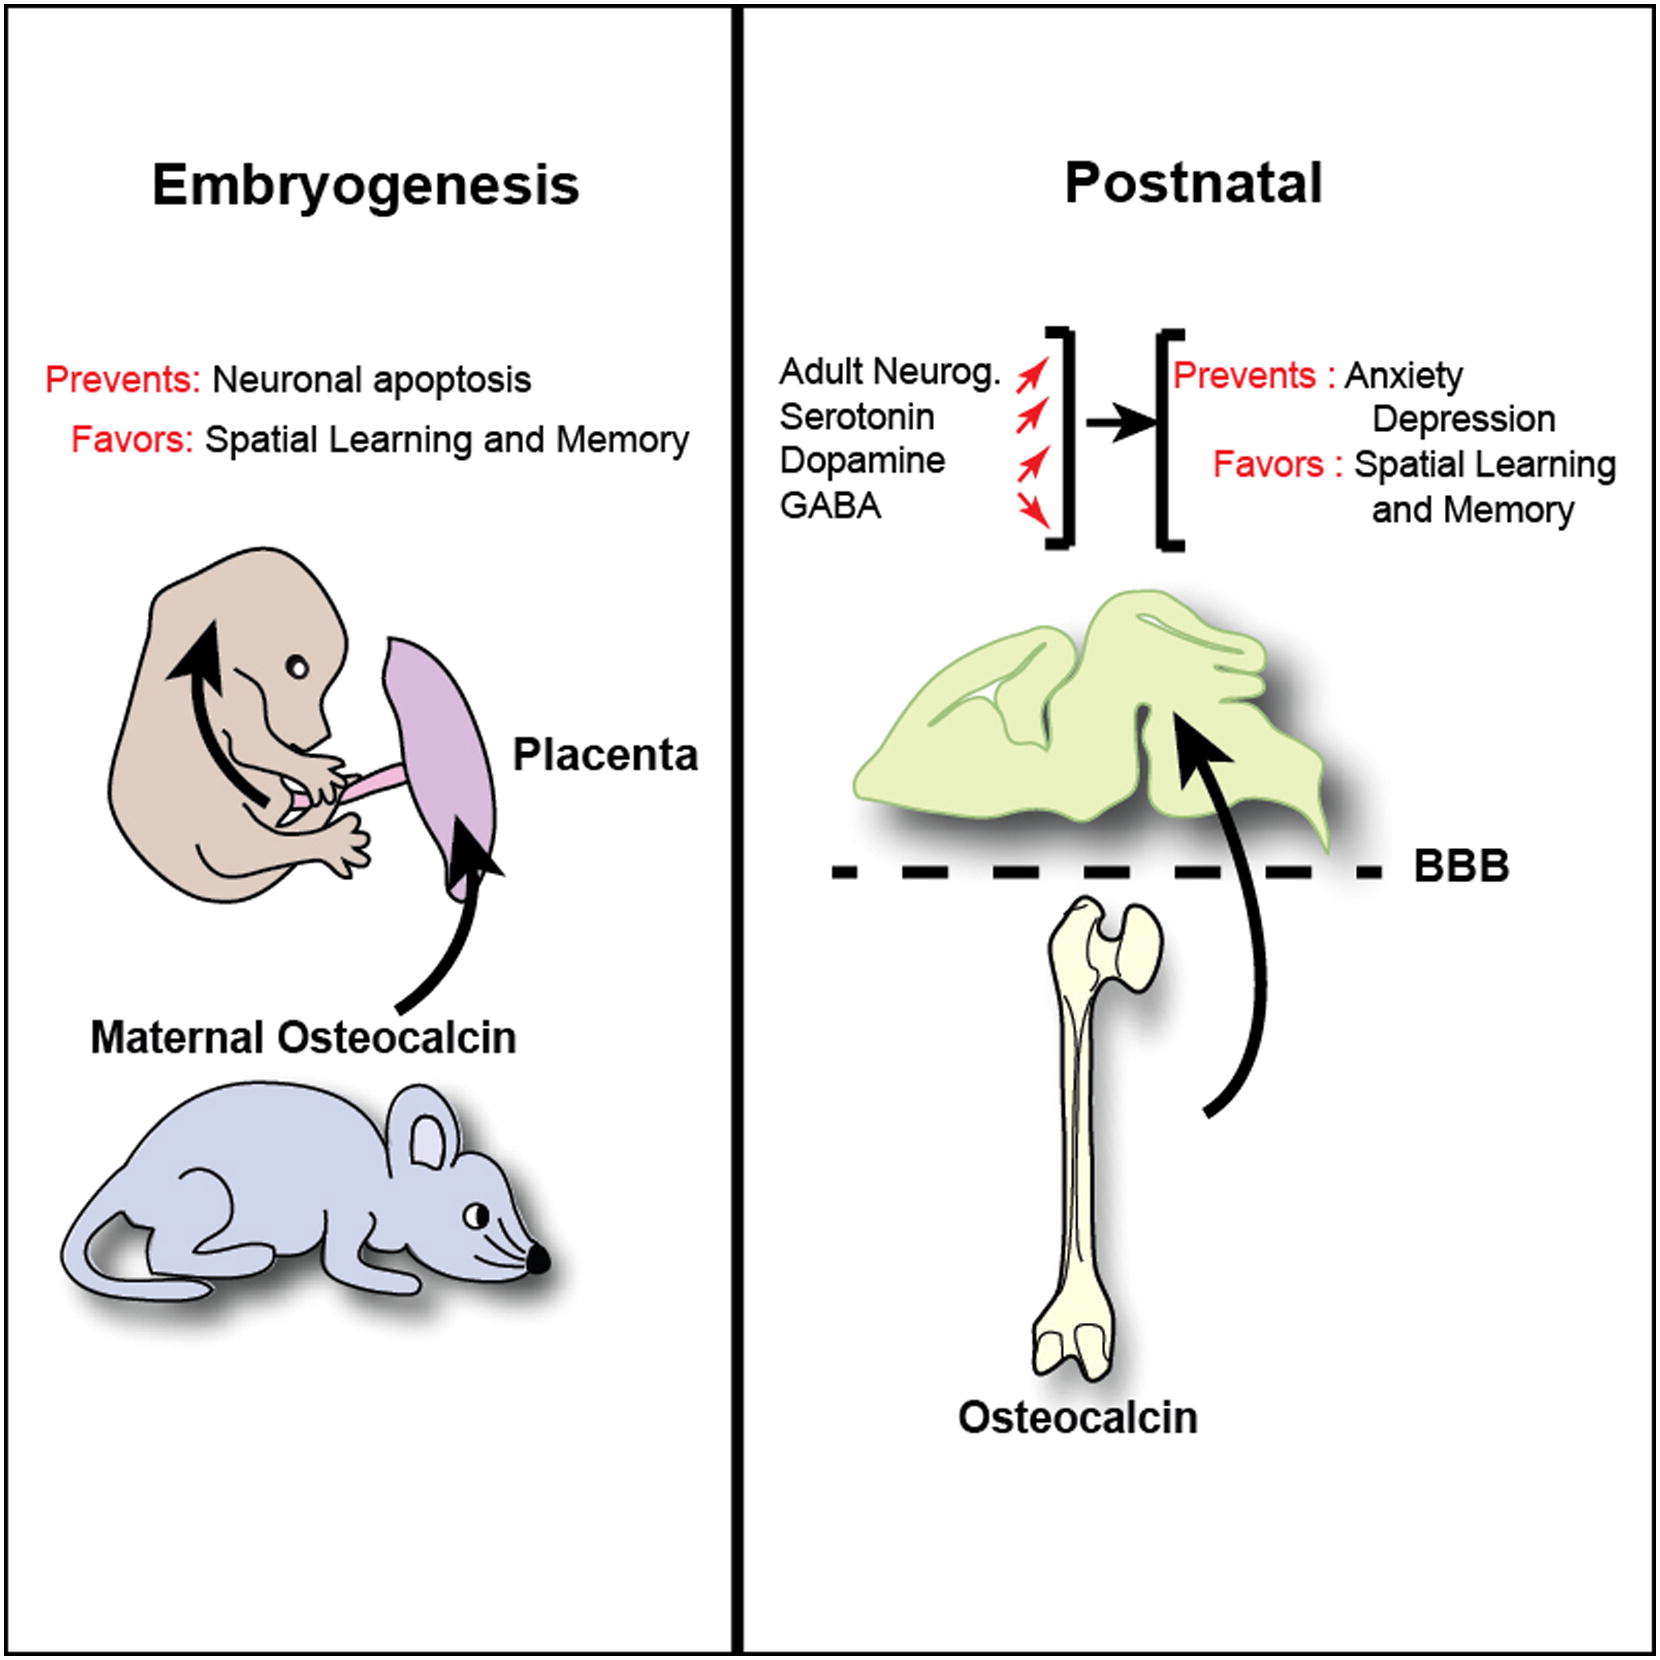  Left: Maternal osteocalcin crosses the placenta during pregnancy before the fetus can produce its own. Right: Osteocalcin can cross the blood-brain barrier and increases levels of certain neurotransmitters. Photo credit: Gerard Karsenty M.D. Ph.D. Columbia University